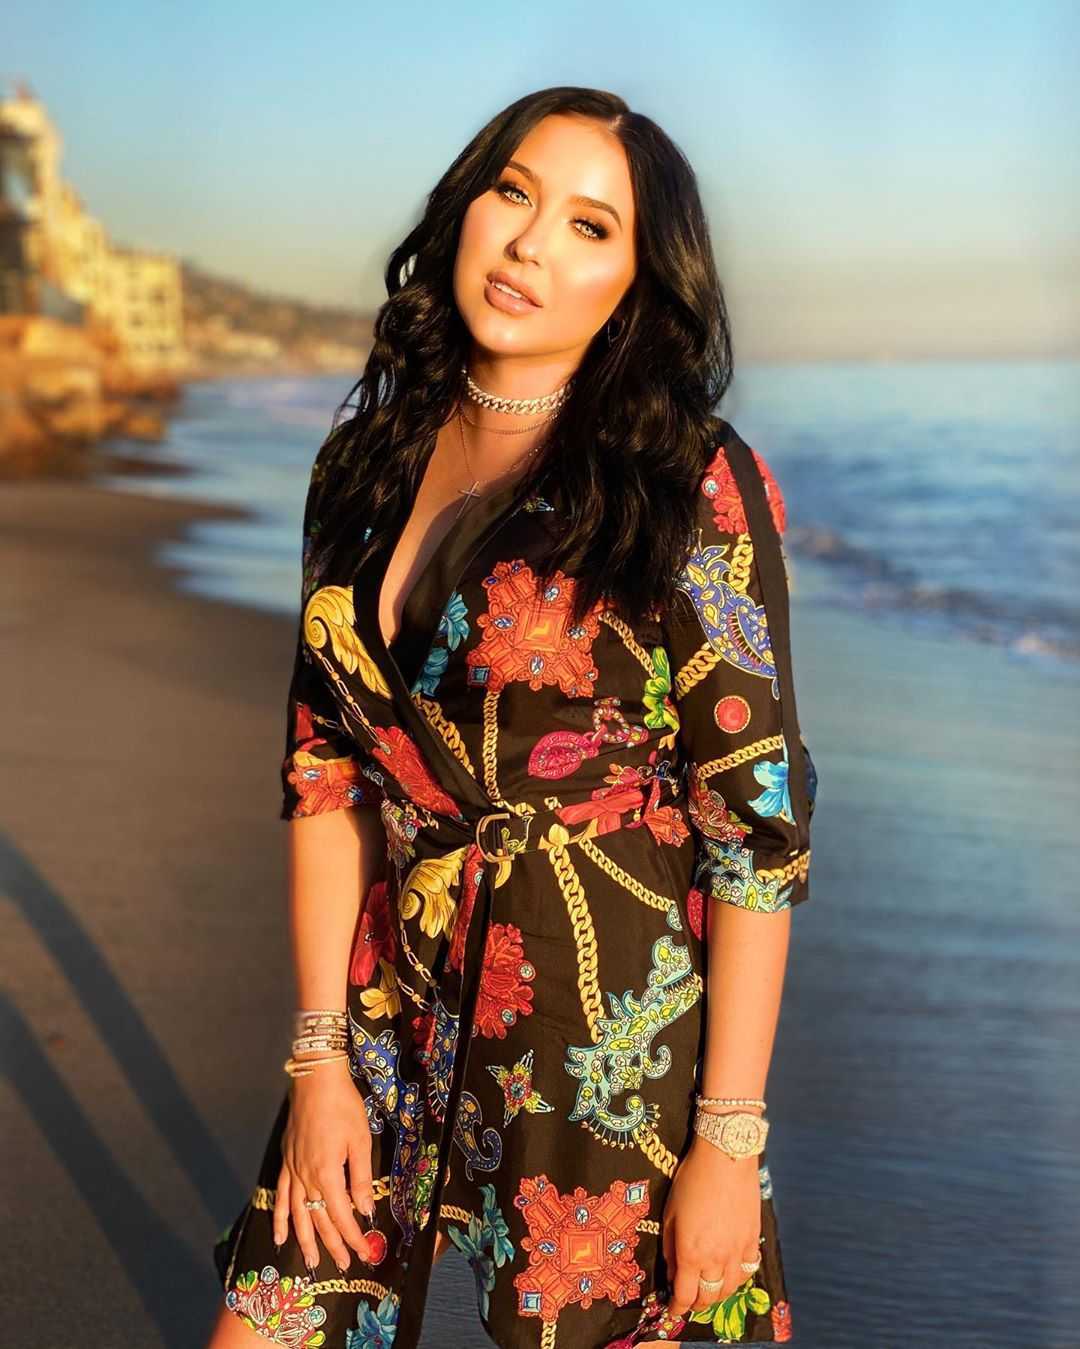 51 Hottest Jaclyn Hill Big Butt Pictures That Are Basically Flawless 87